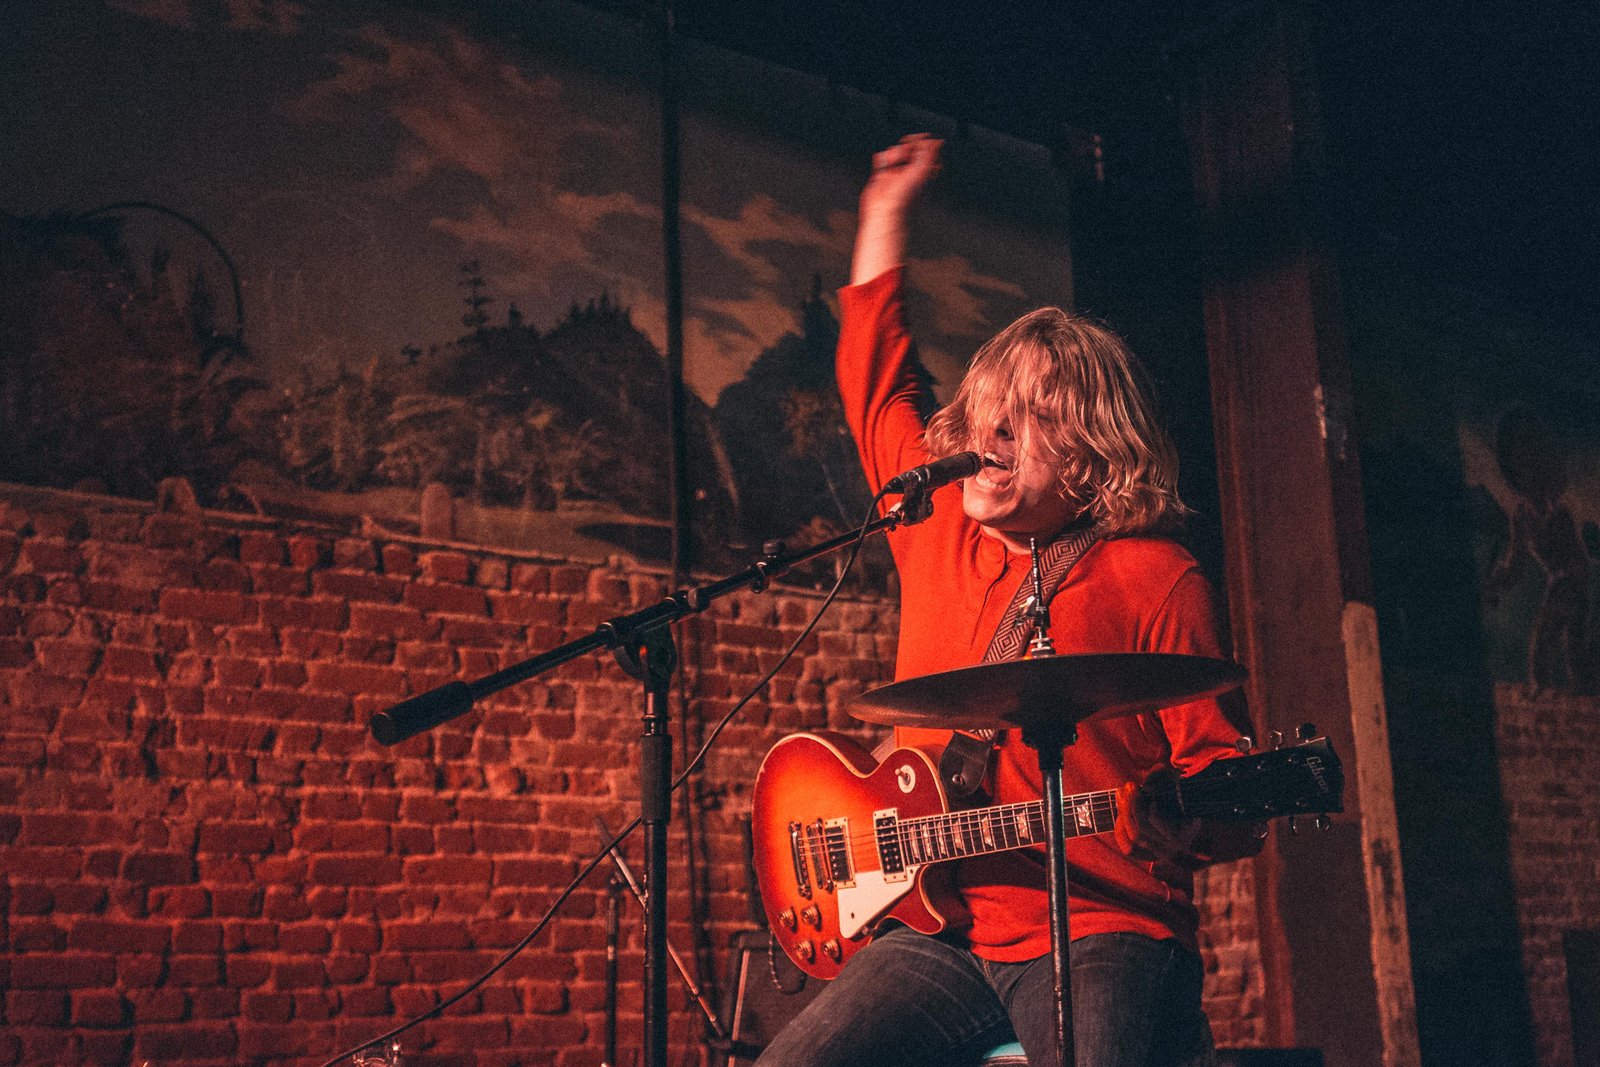 Ty Segall at The Smell's 18th Birthday